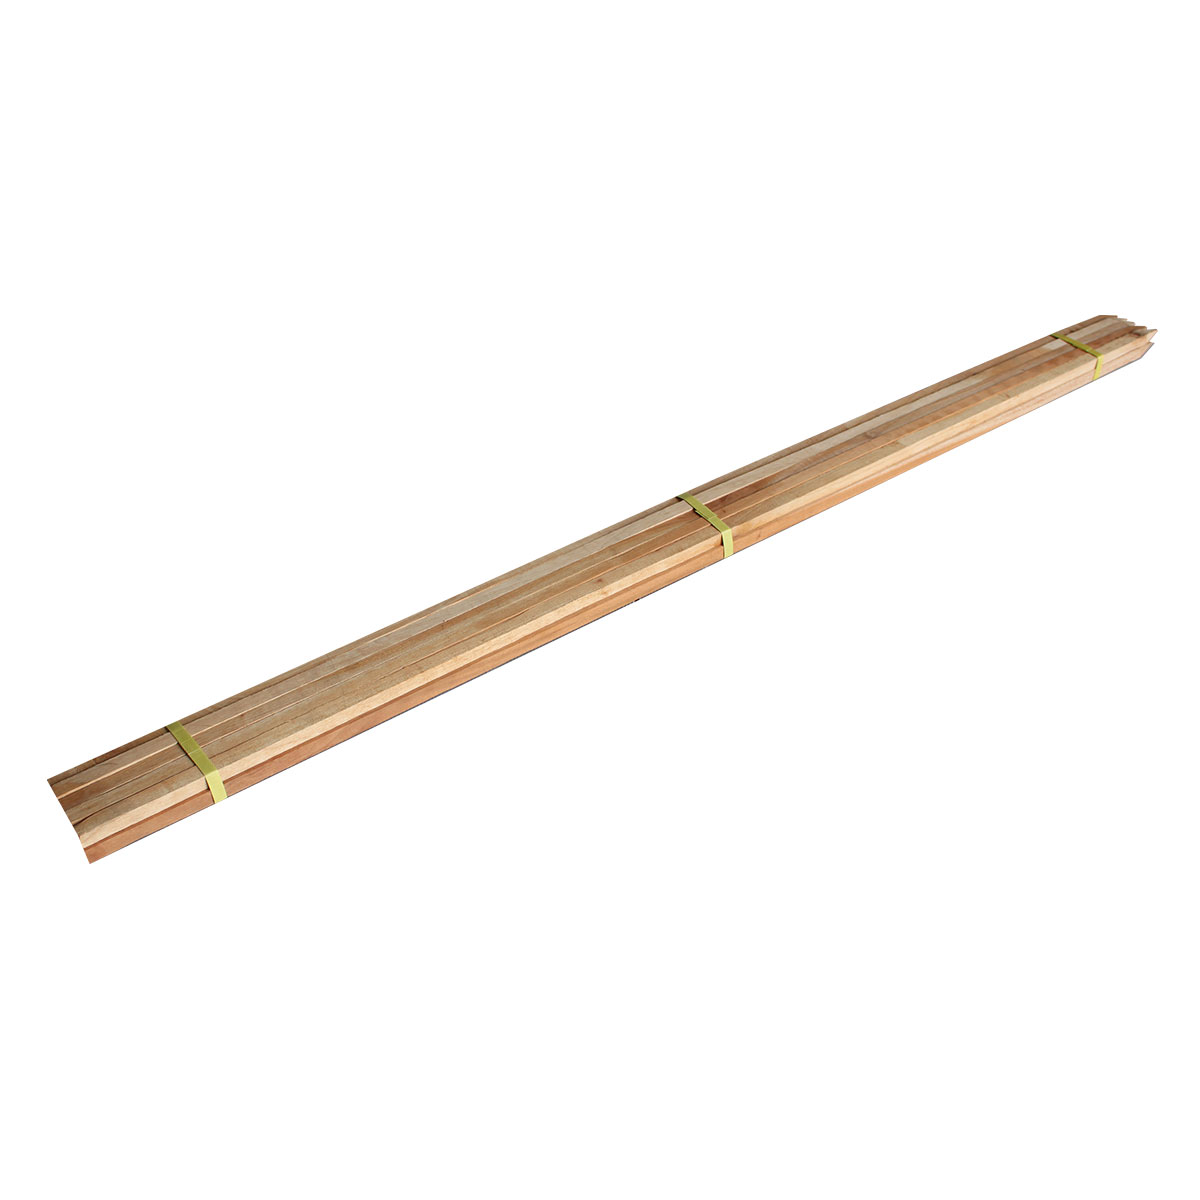 Hardwood Stakes 17 x 17 x 1500mm - 10 Pack